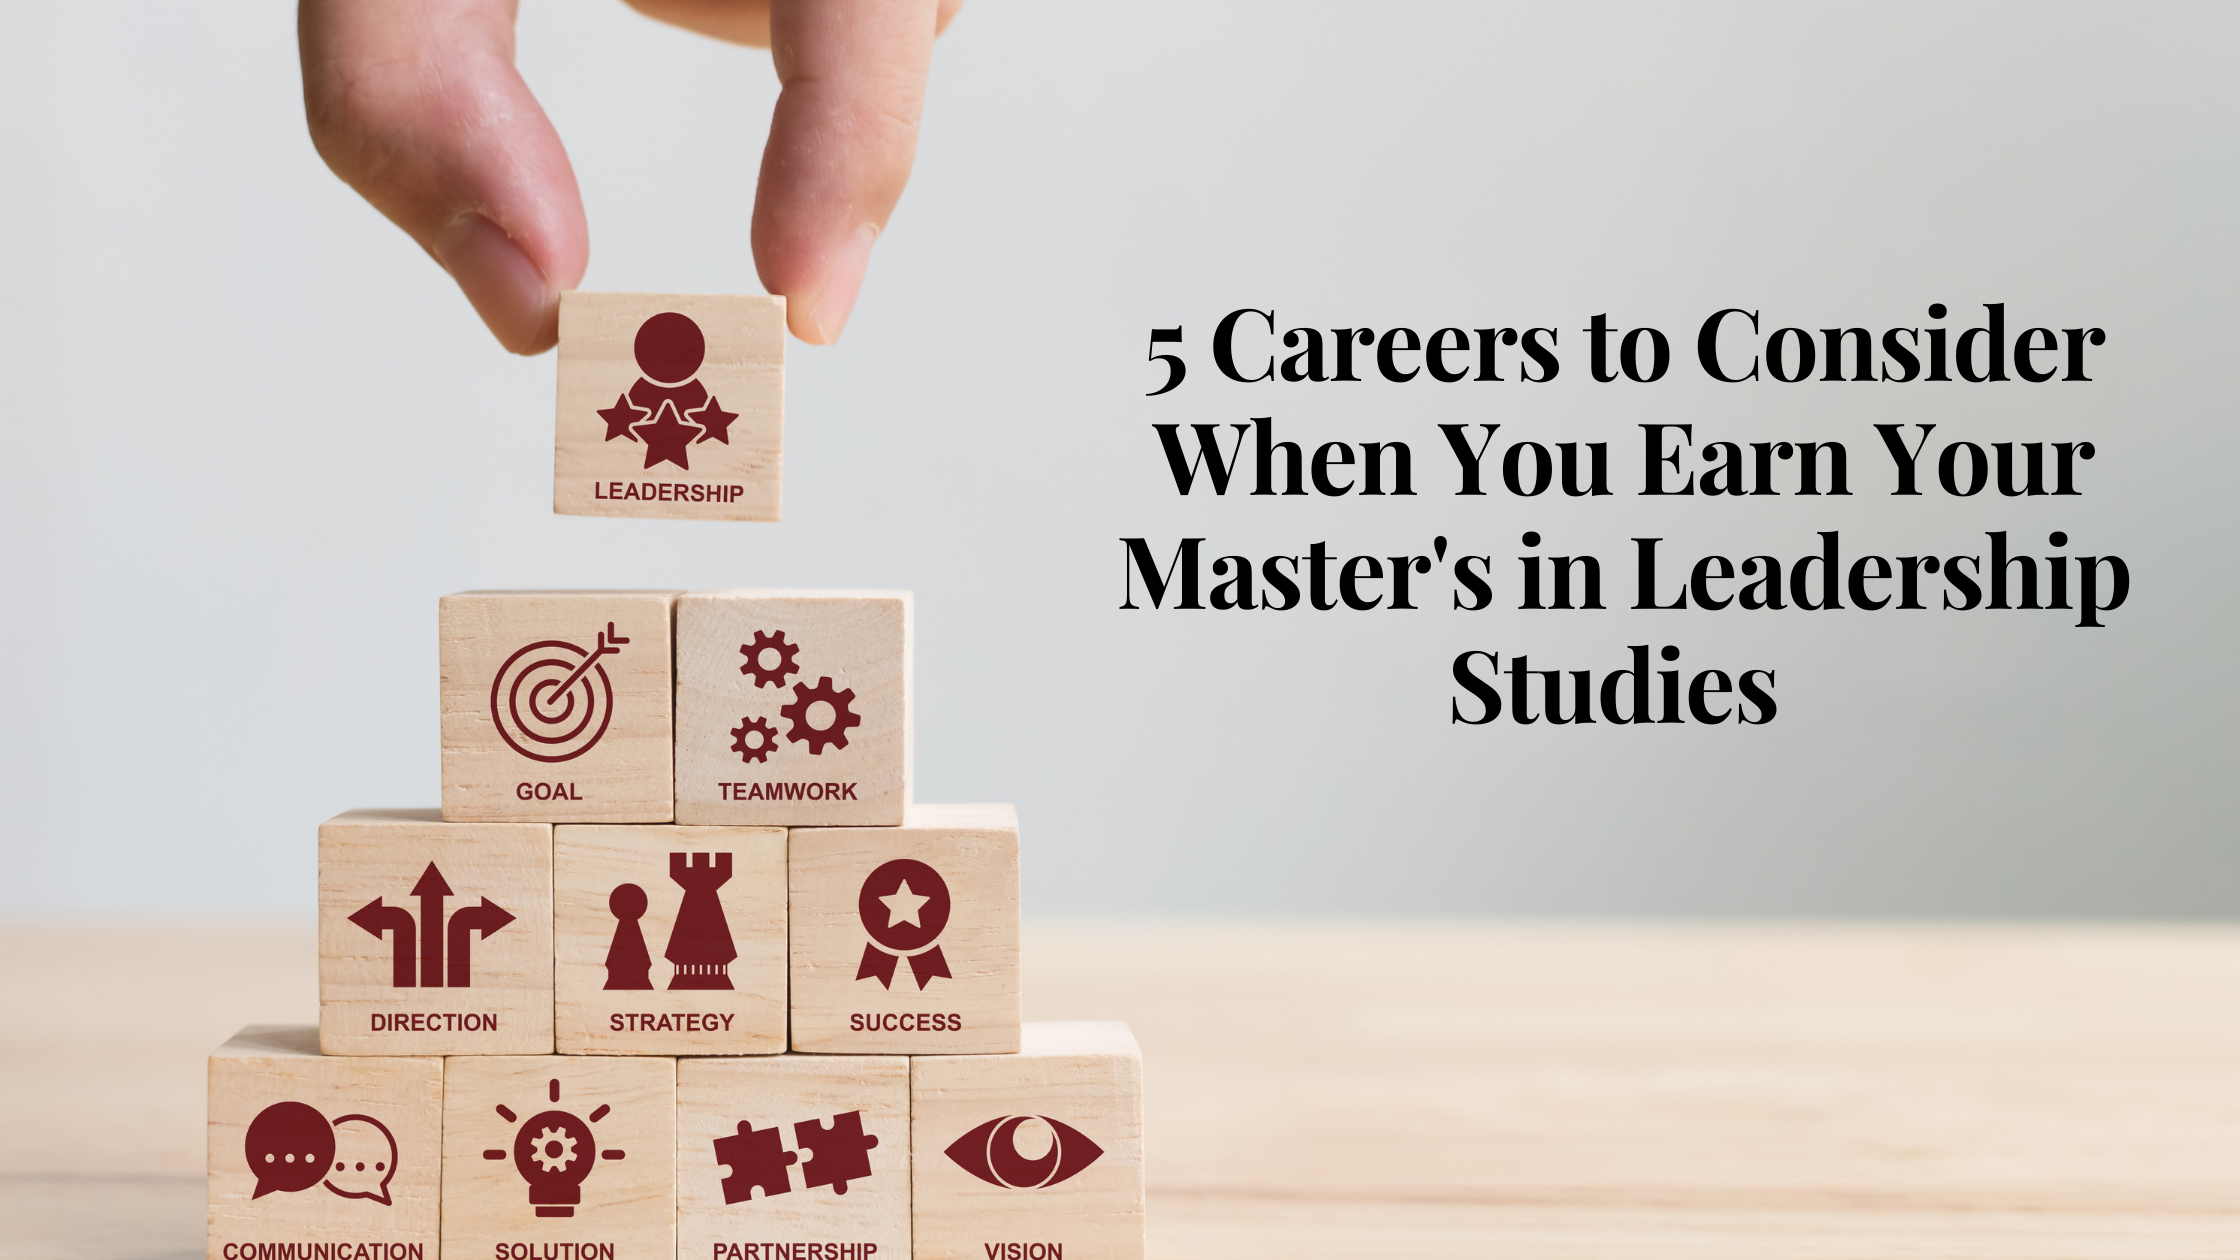 Image of 5 Careers to Consider When You Earn Your Master's in Leadership Studies  